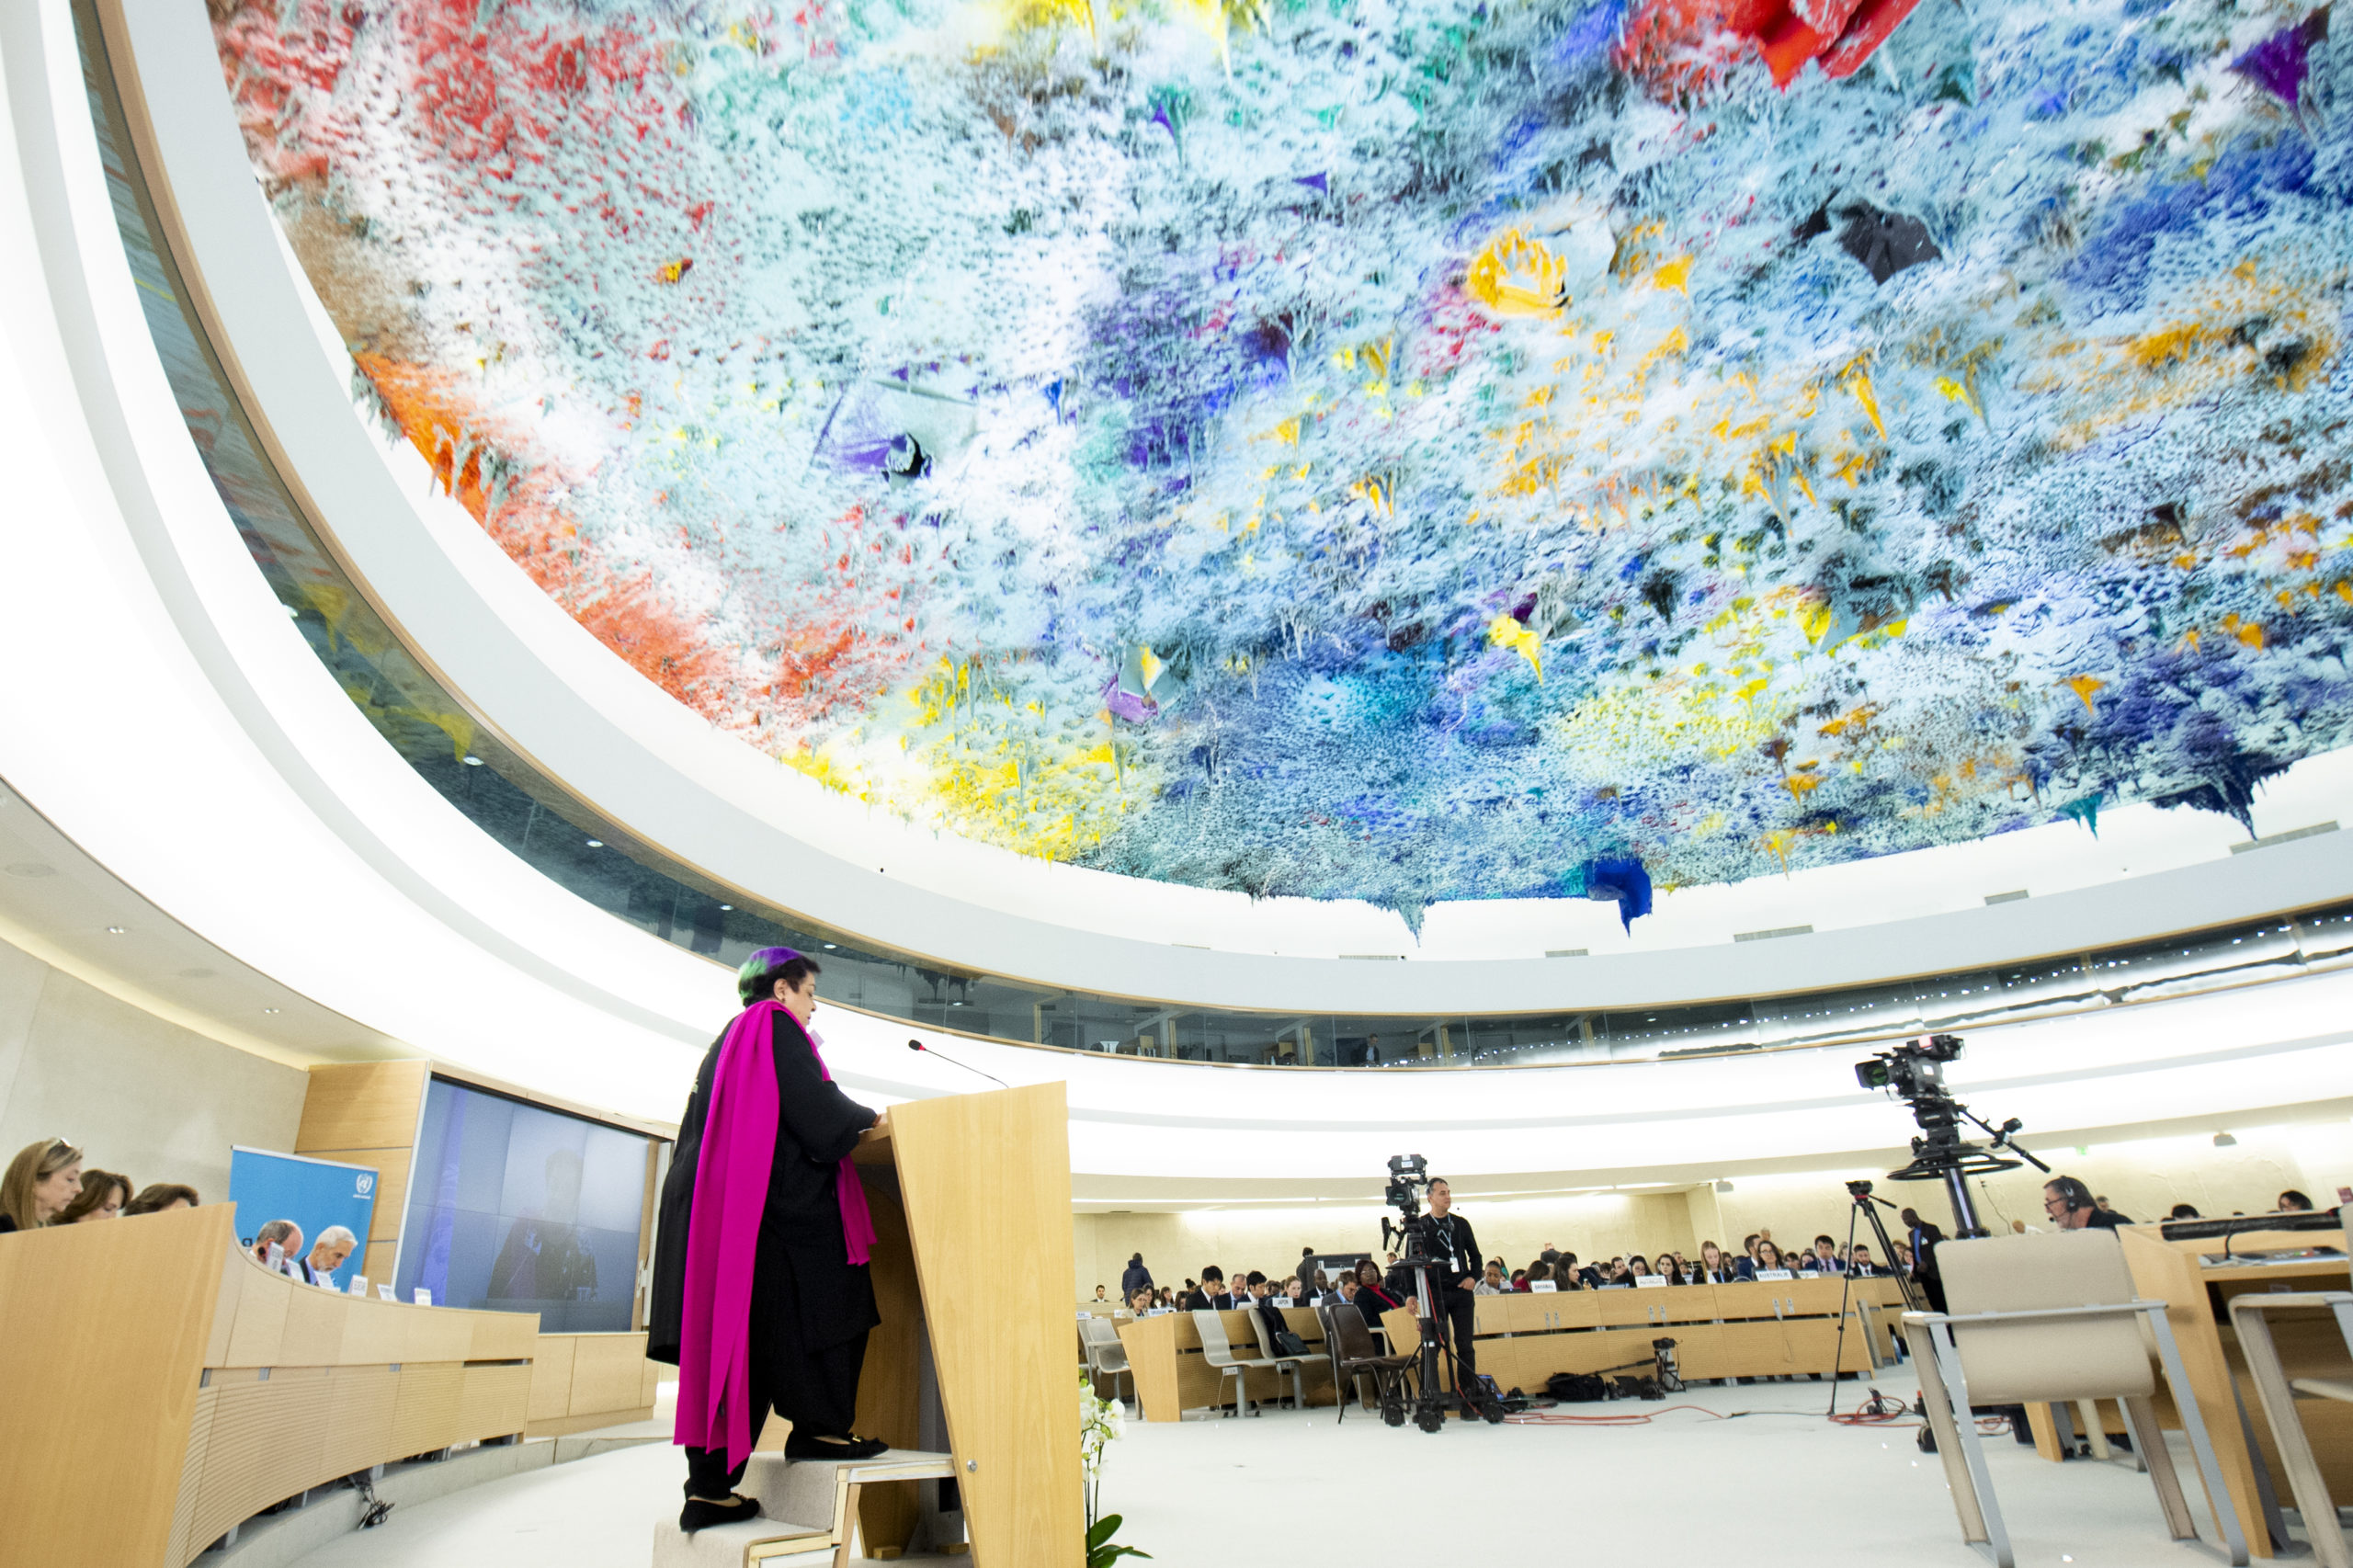 Behind the Scenes of Global Human Rights: A Review of Tistounet’s The UN Human Rights Council: A Practical Anatomy